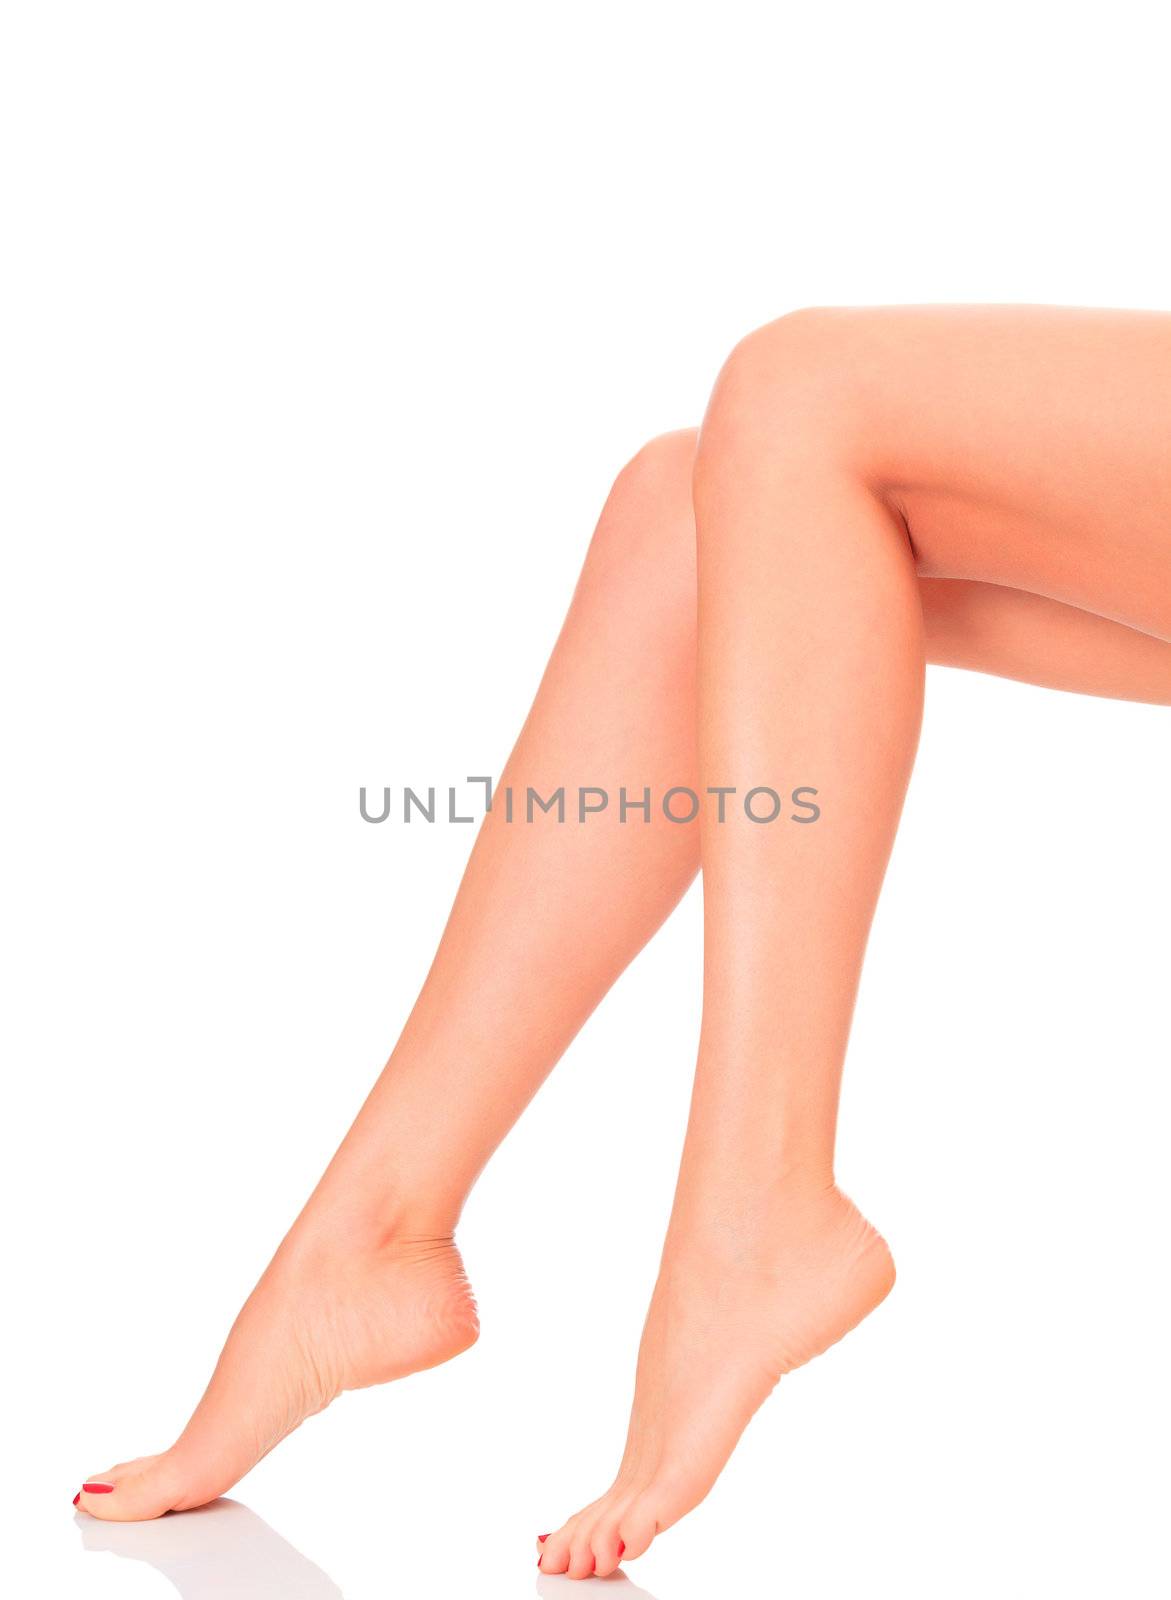 Perfect female legs, isolated on white background